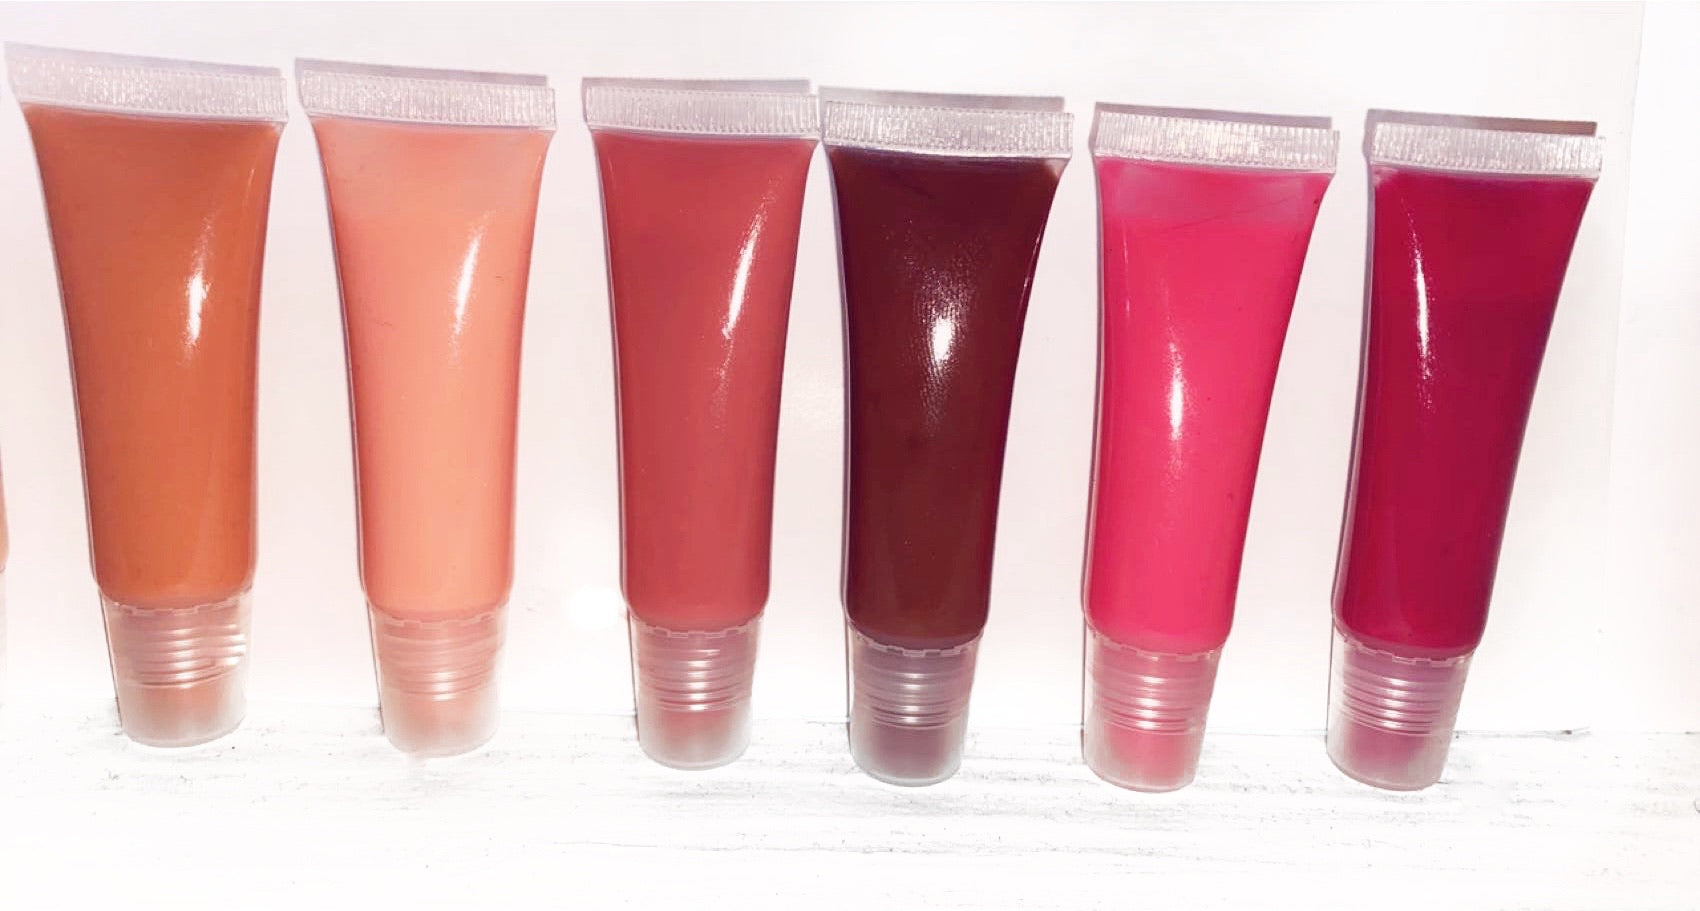 12 oz NEW IMPROVED THICKER Versagel ® M Standard - Mineral Oil Based Lip  Gloss Base - by No Prob-llama- Ships Next Business Day